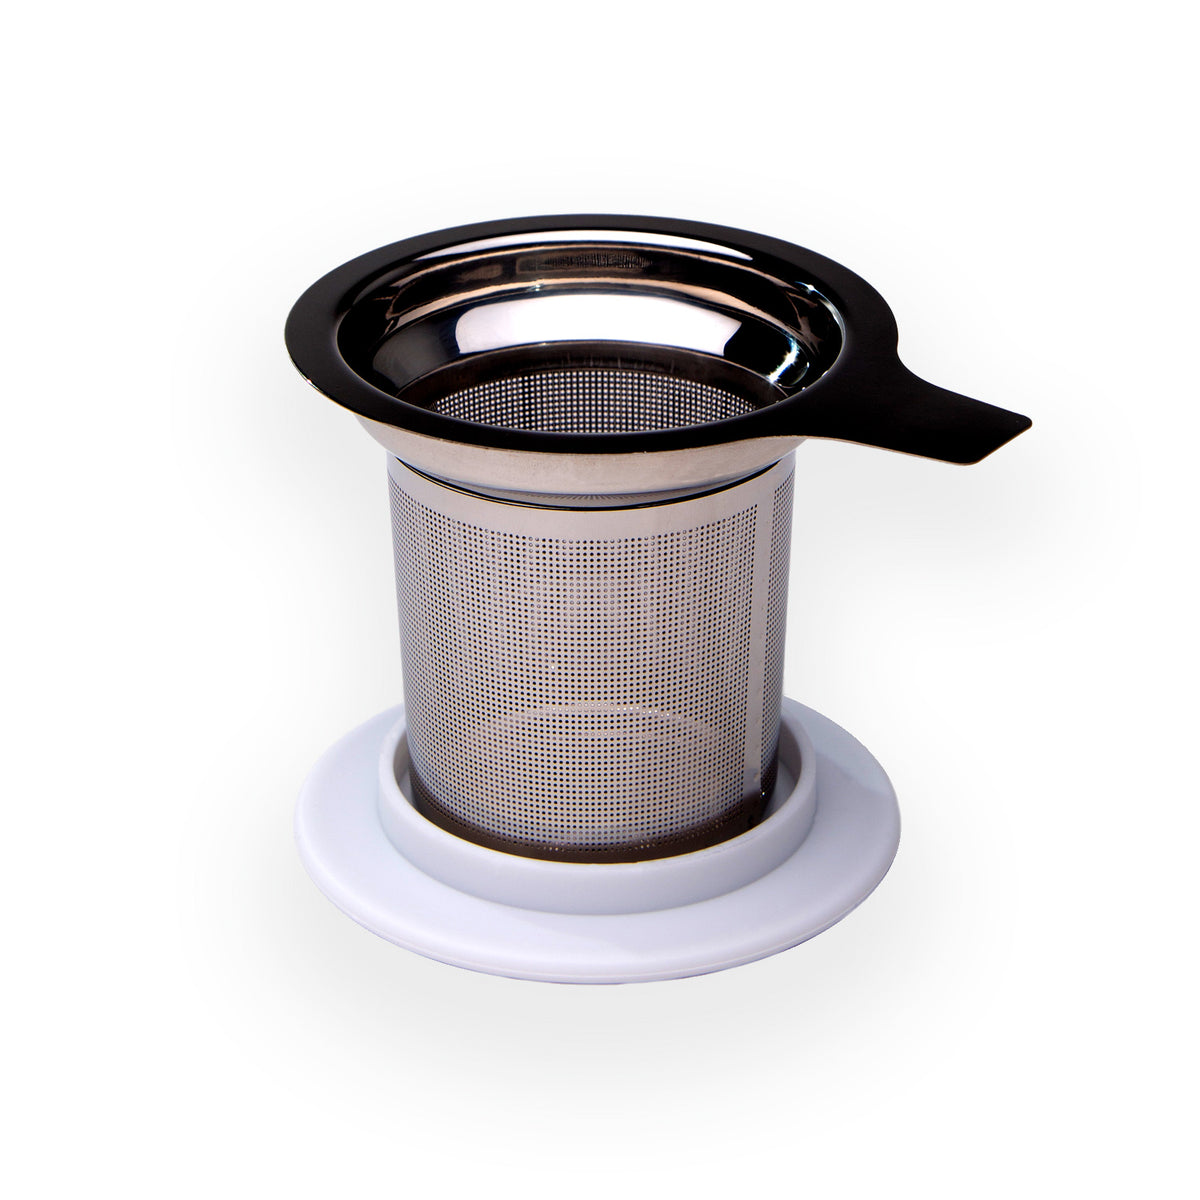 The Tea House Tea Infuser Front View Sitting on Coaster Top